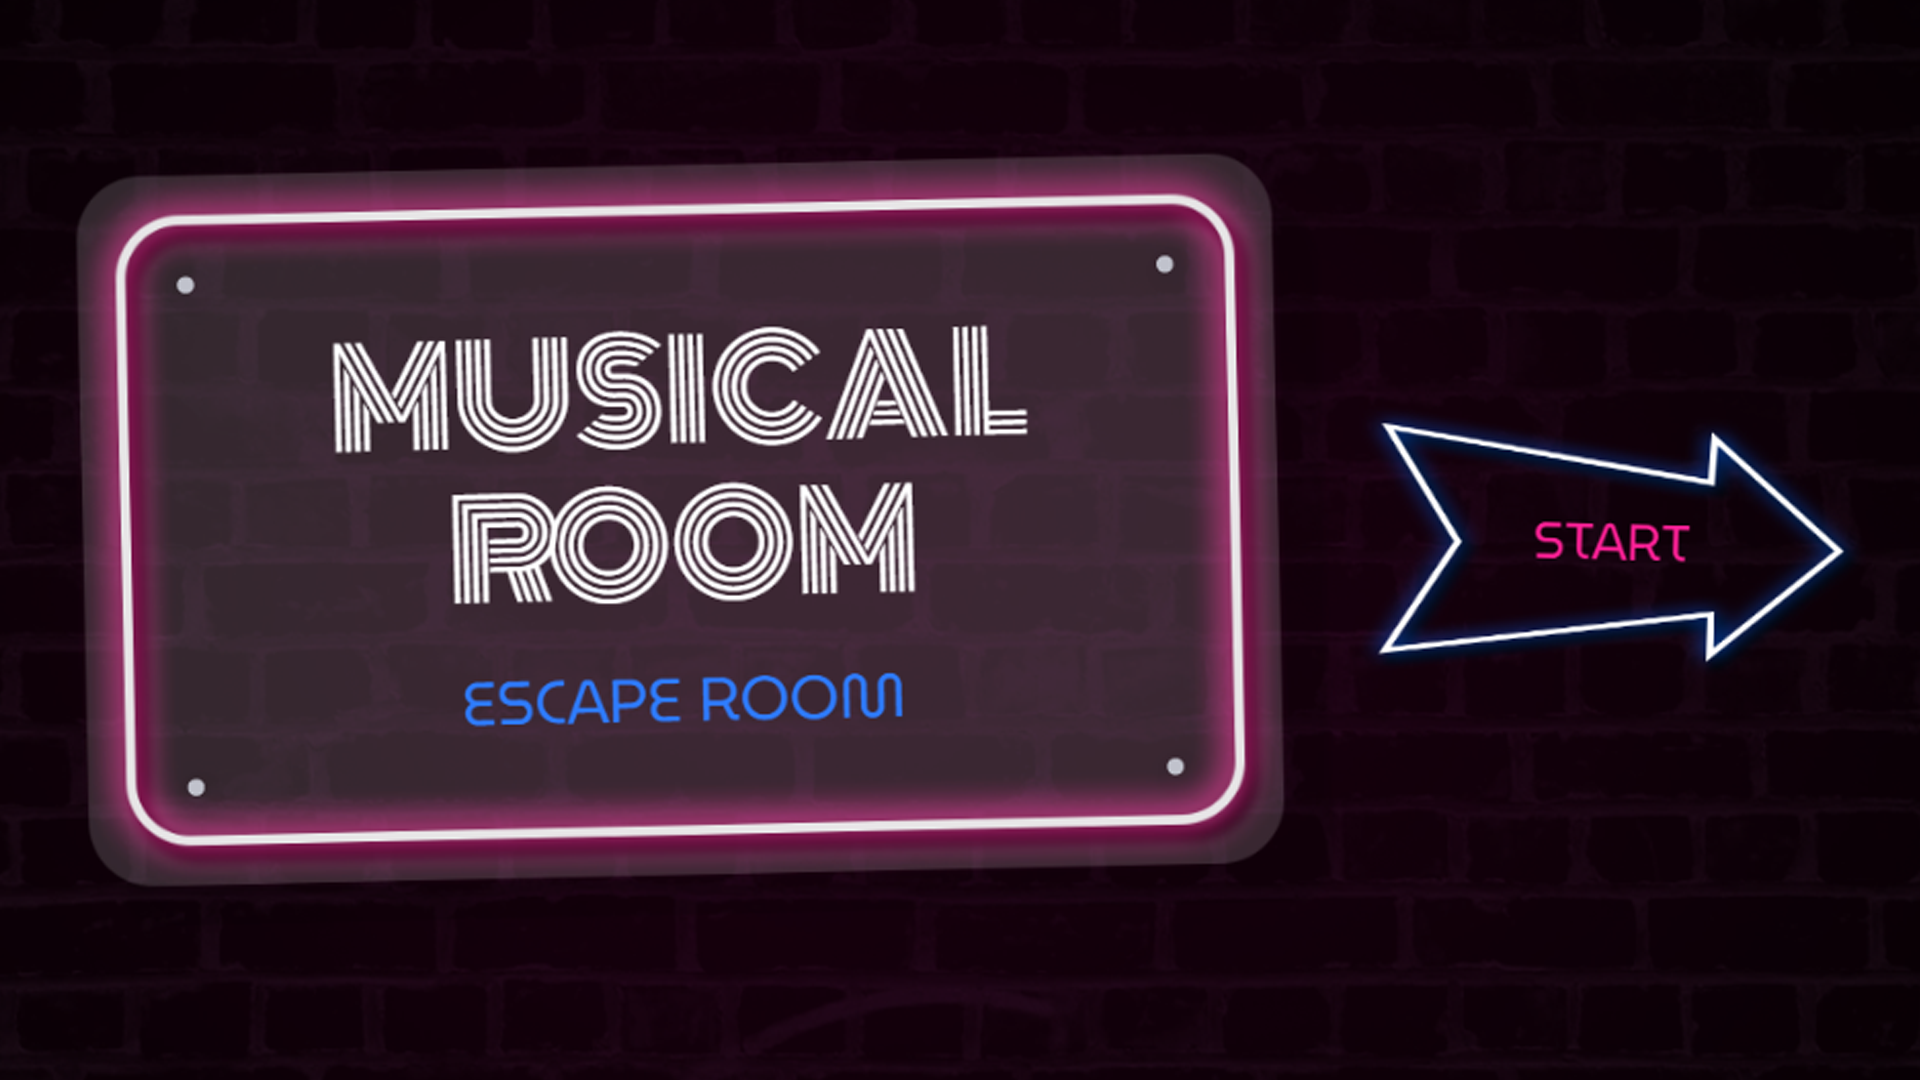 Scape Room Musical – genially